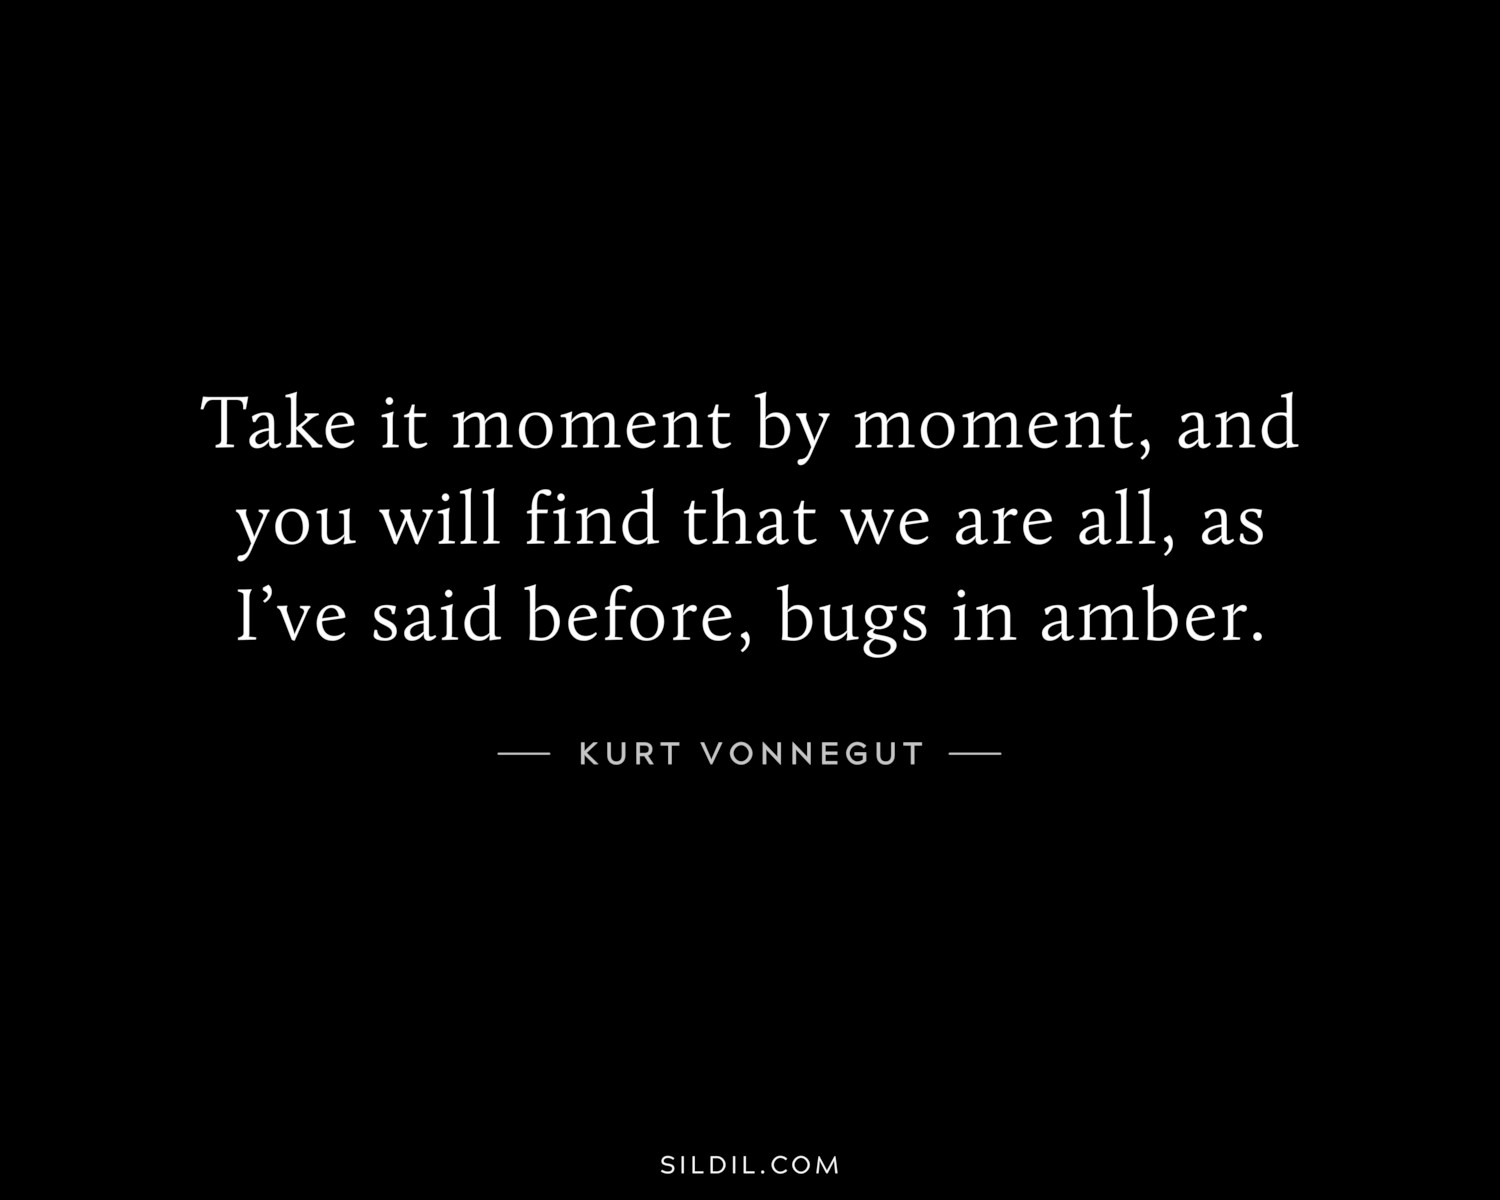 Take it moment by moment, and you will find that we are all, as I’ve said before, bugs in amber.